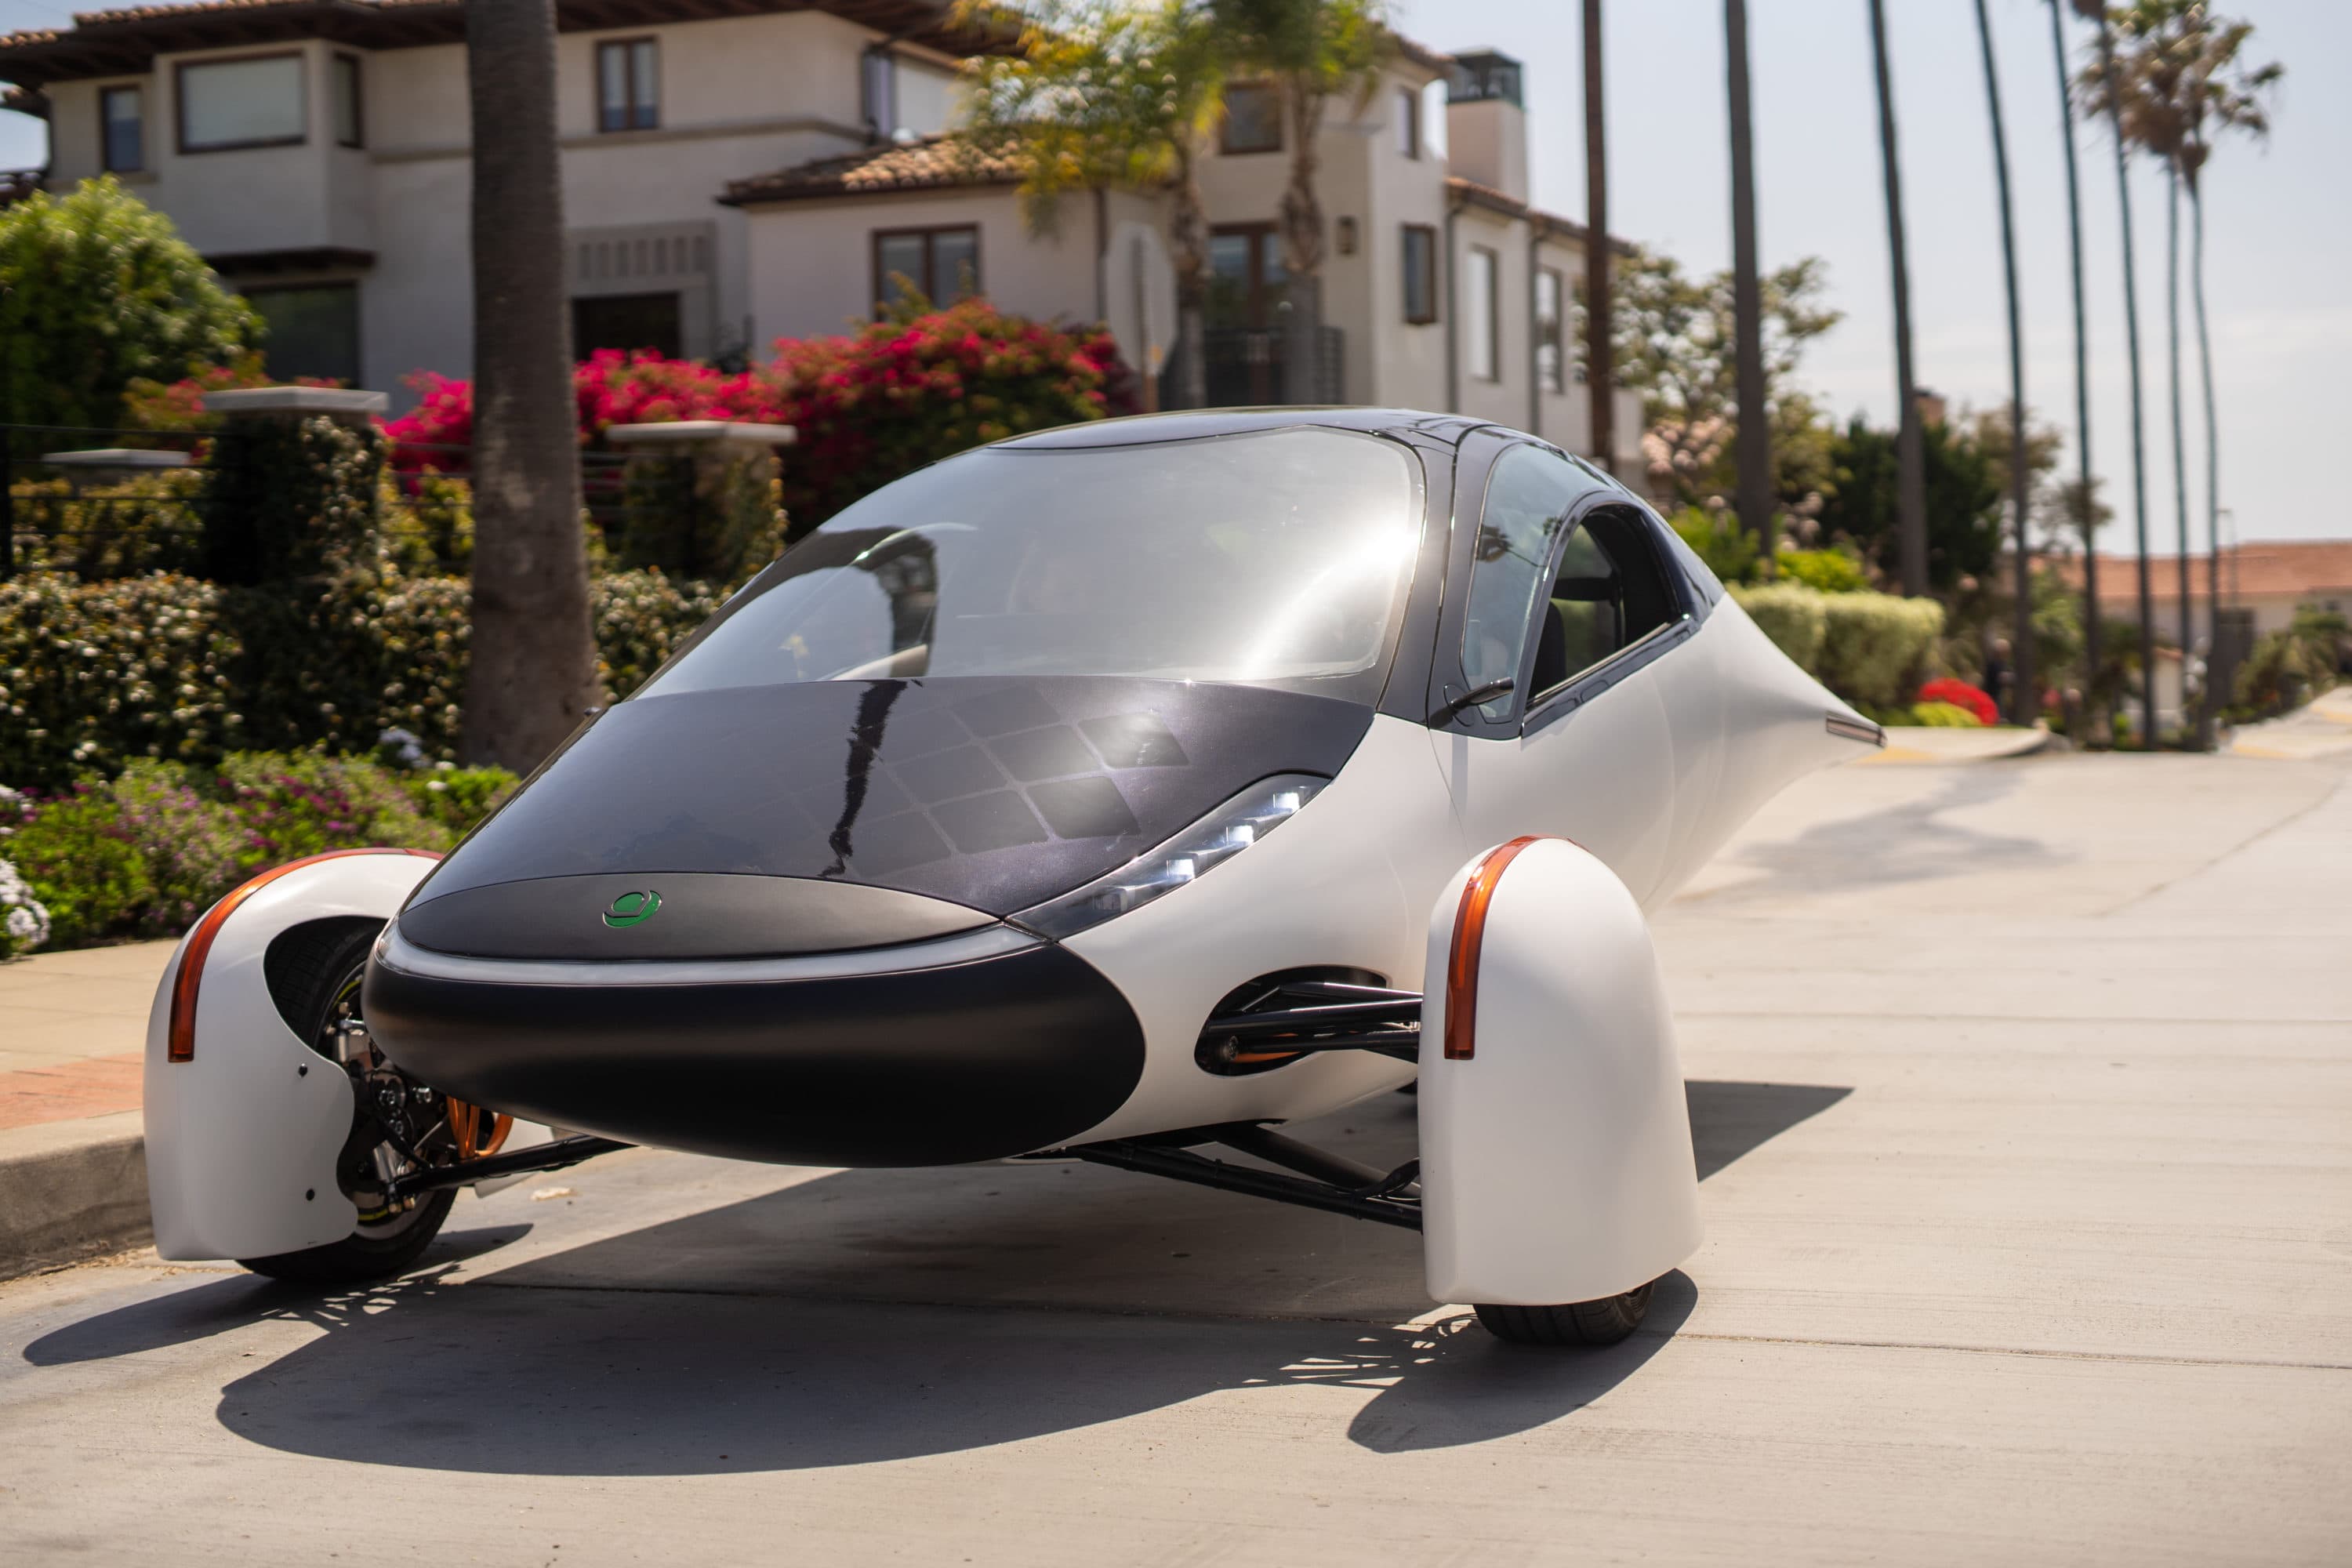 Coming Soon? An Electric Car That Uses The Power Of The Sun